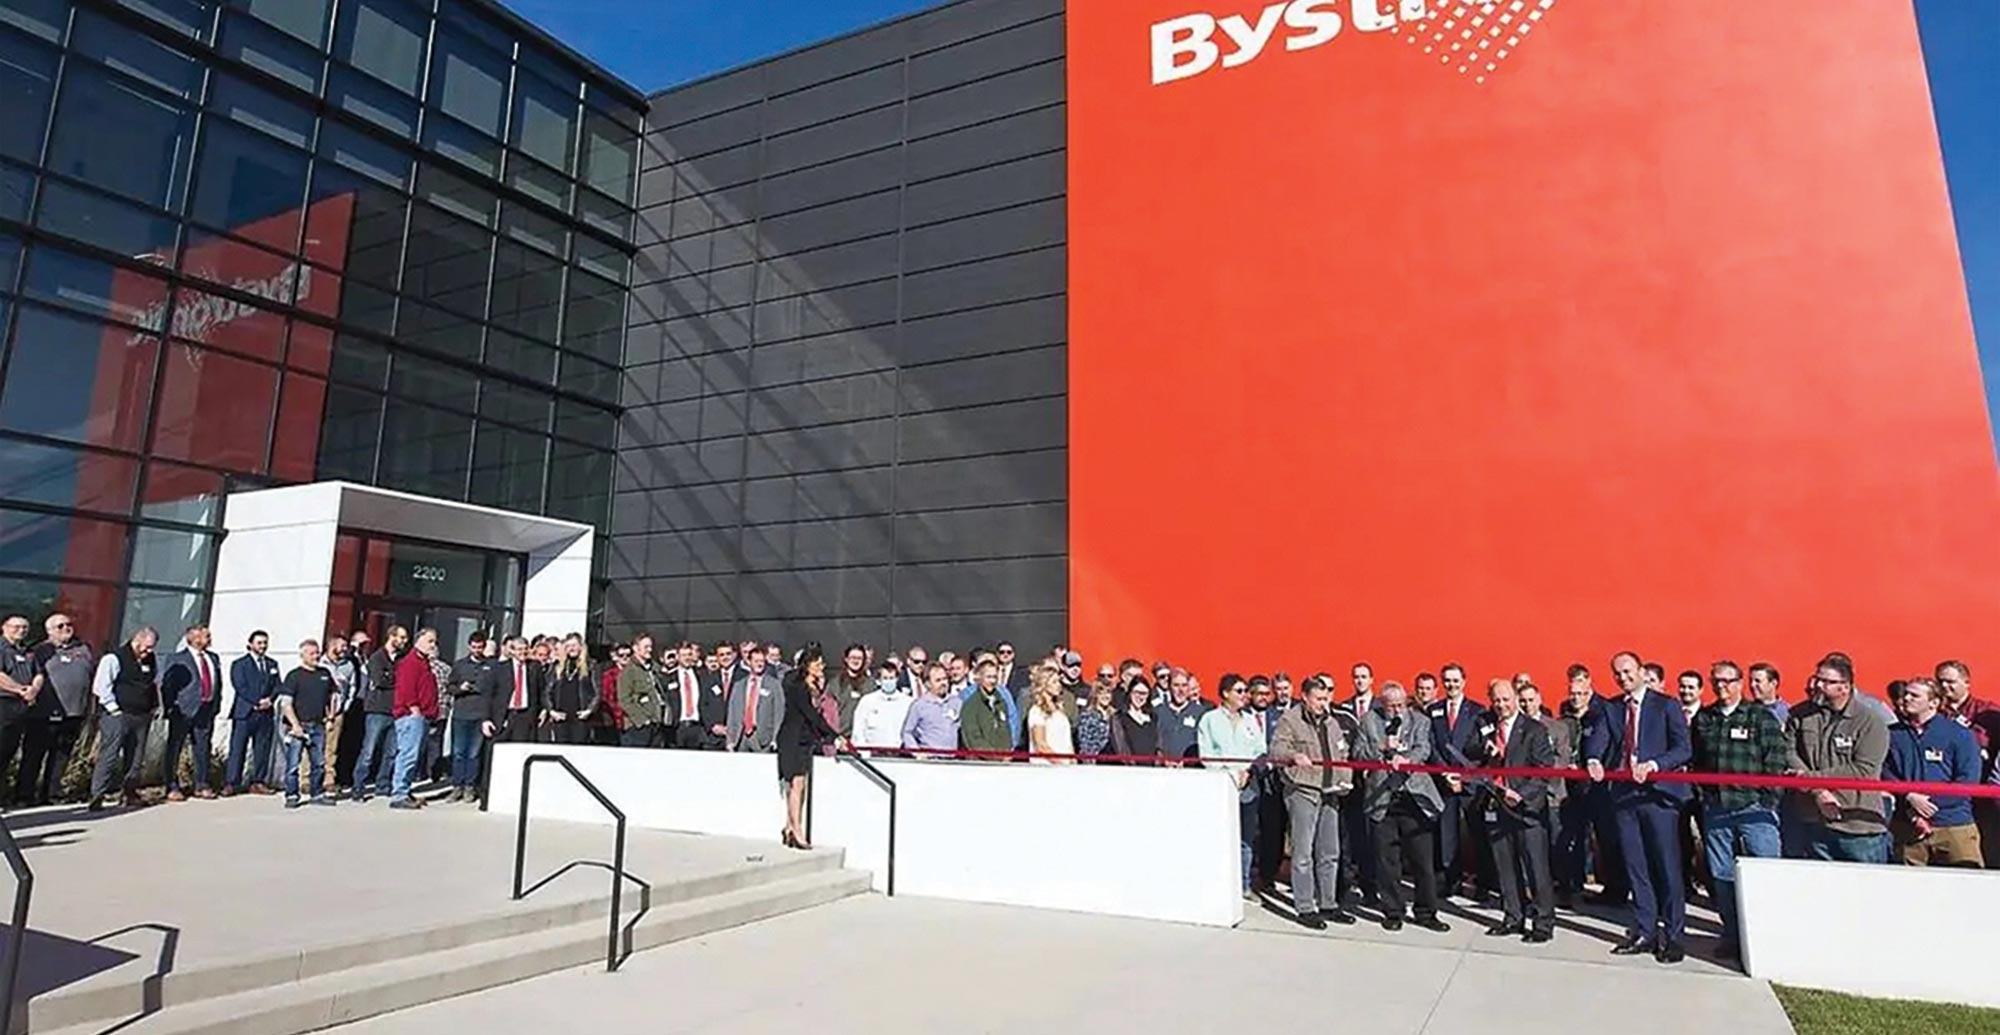 a large crowd stands behind red tape with a Bystronic Inc. building in the background